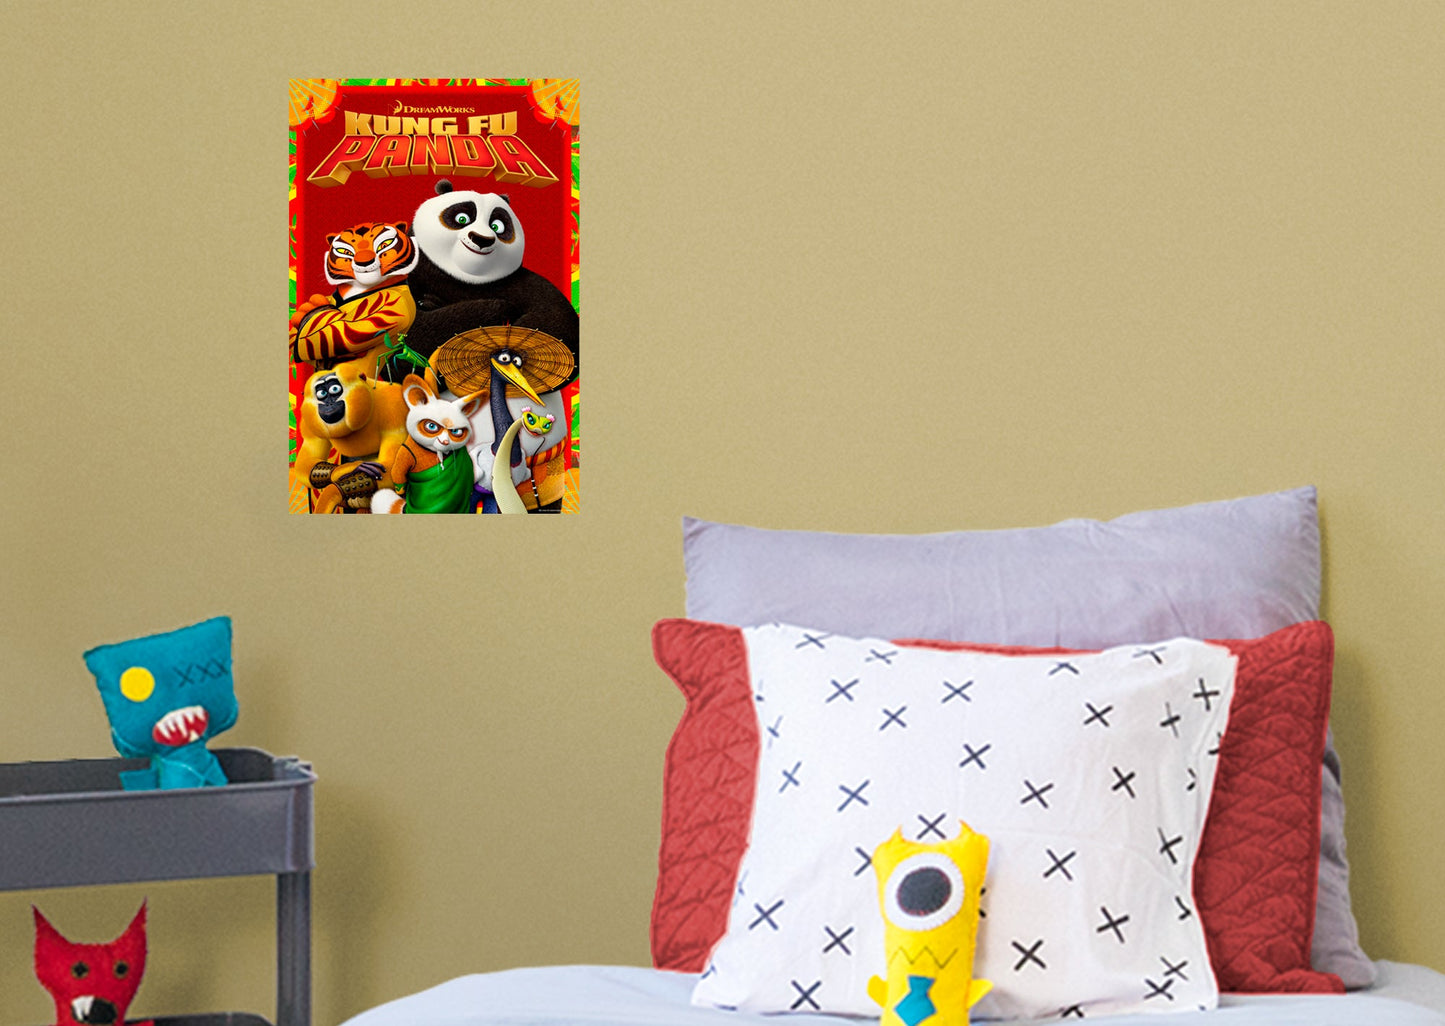 Kung Fu Panda:  Movie Poster Mural        - Officially Licensed NBC Universal Removable Wall   Adhesive Decal